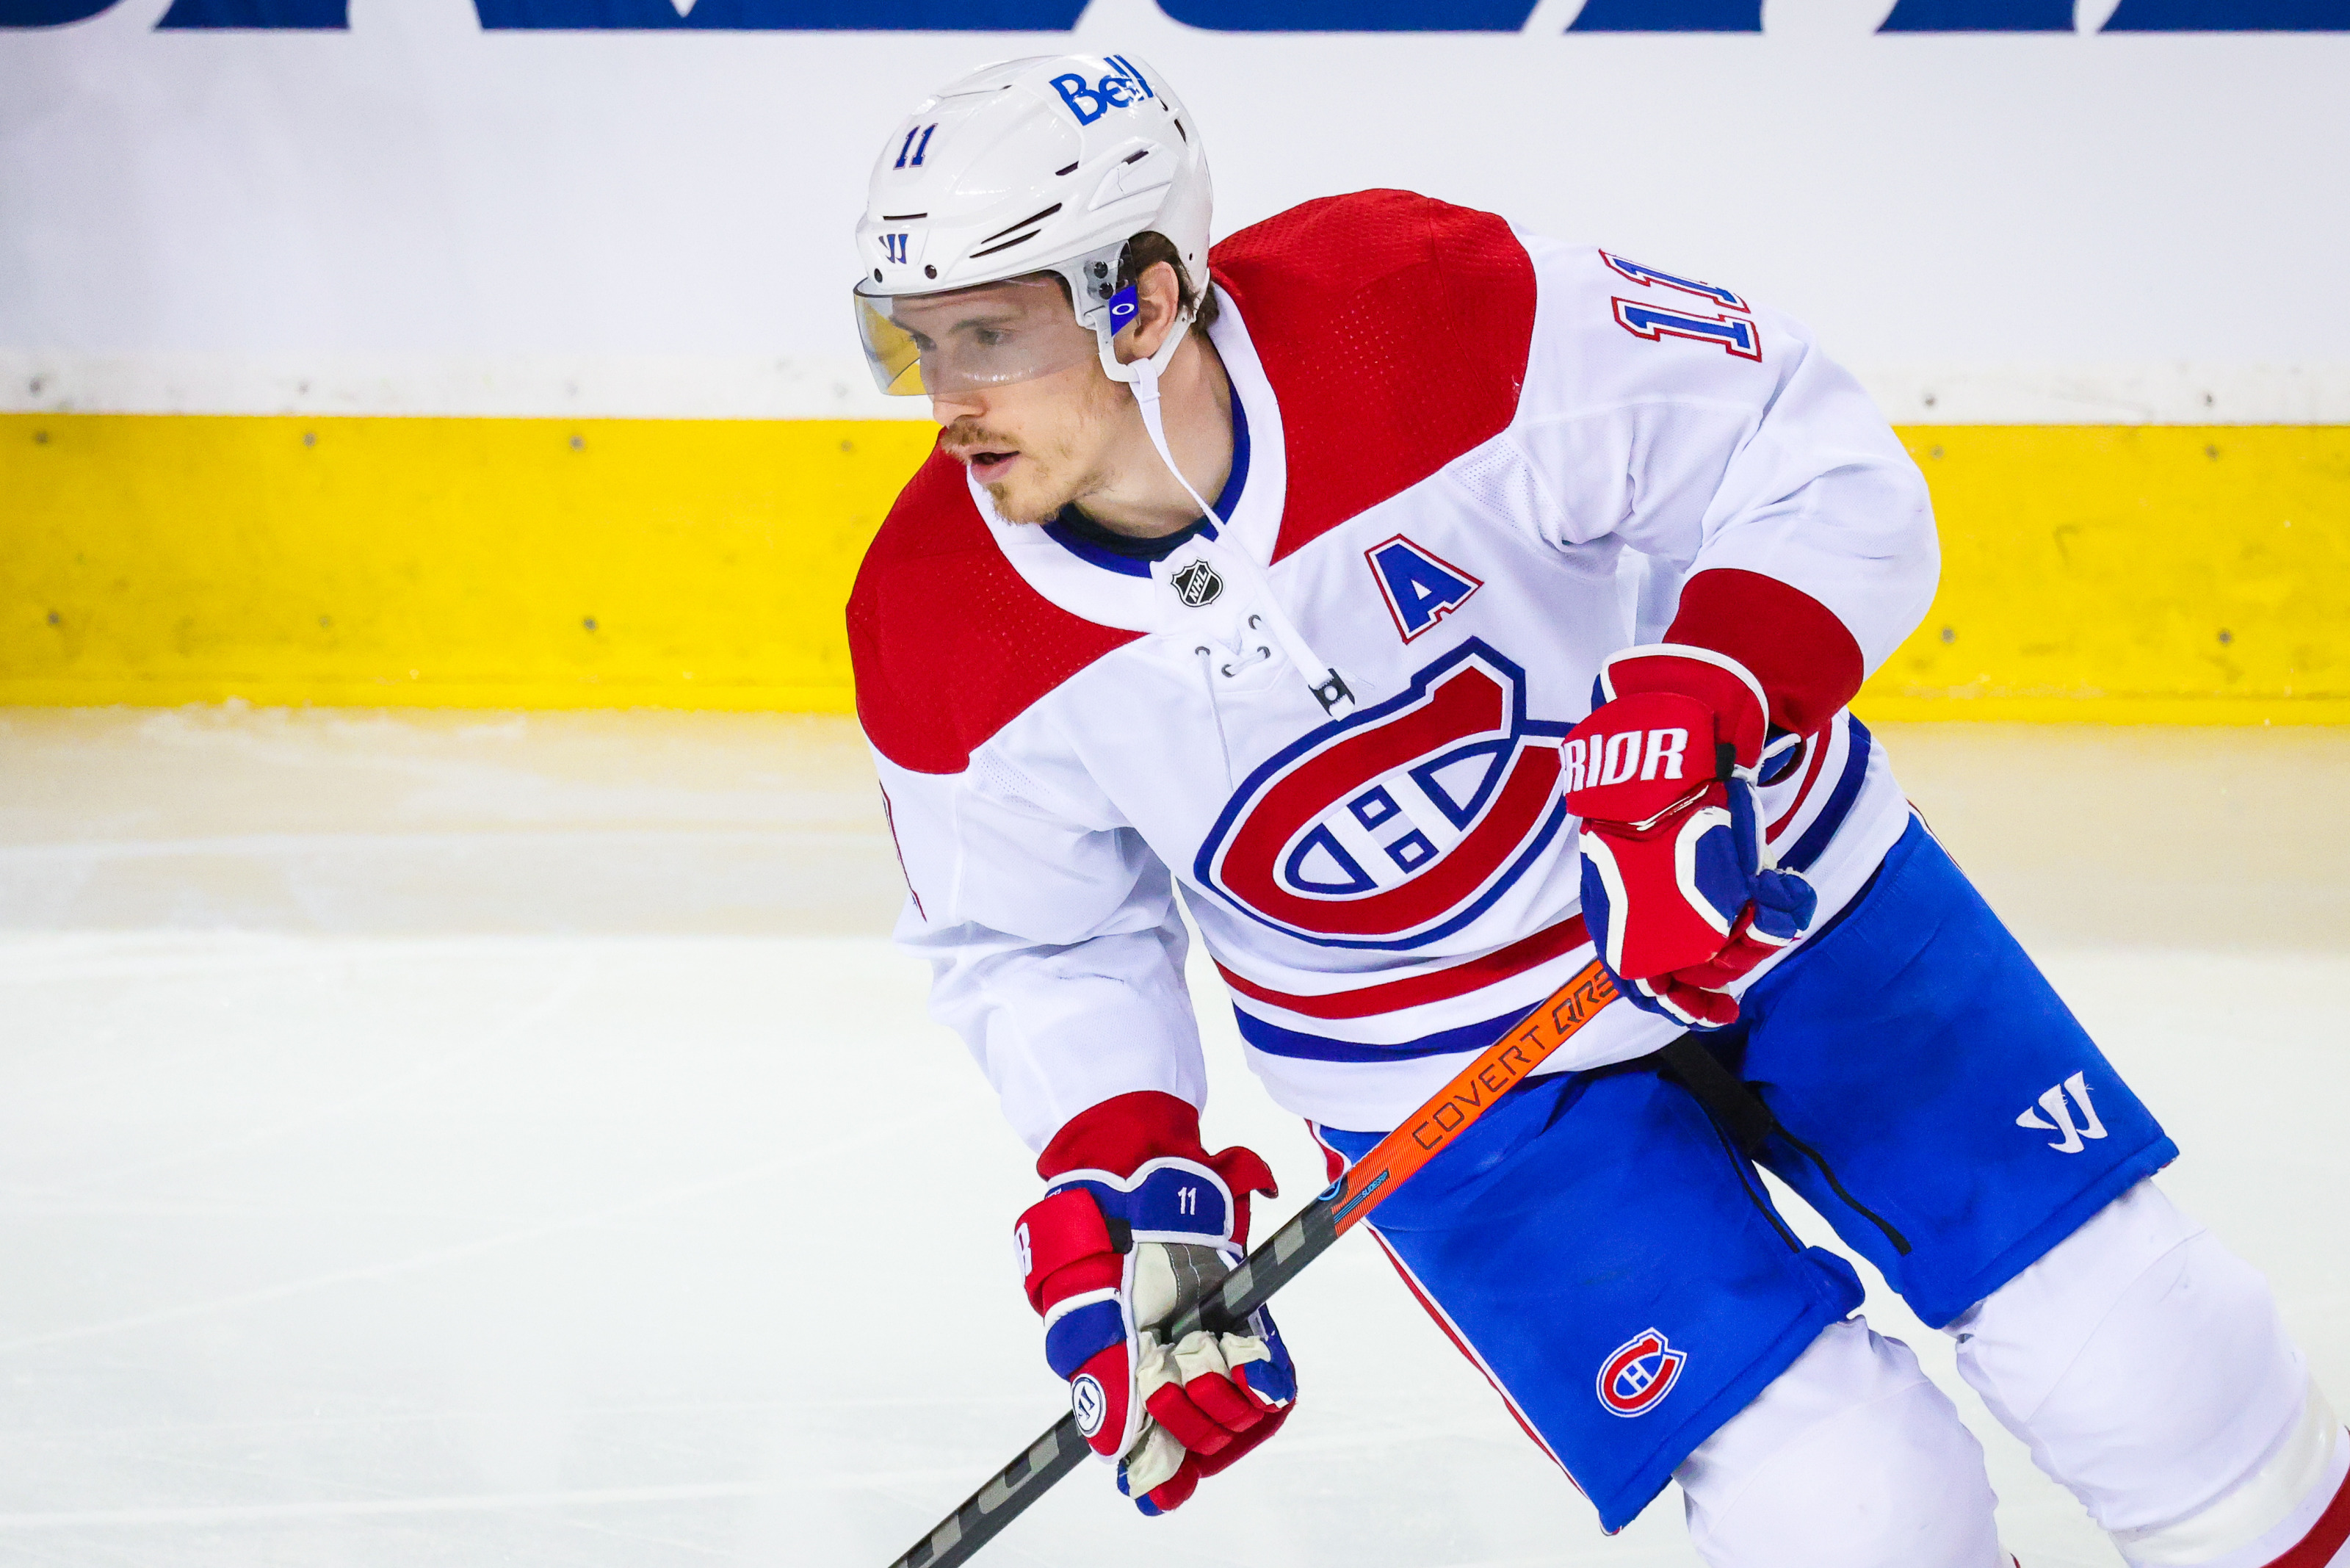 Canadiens' Brendan Gallagher vows to play smarter in bid to avoid